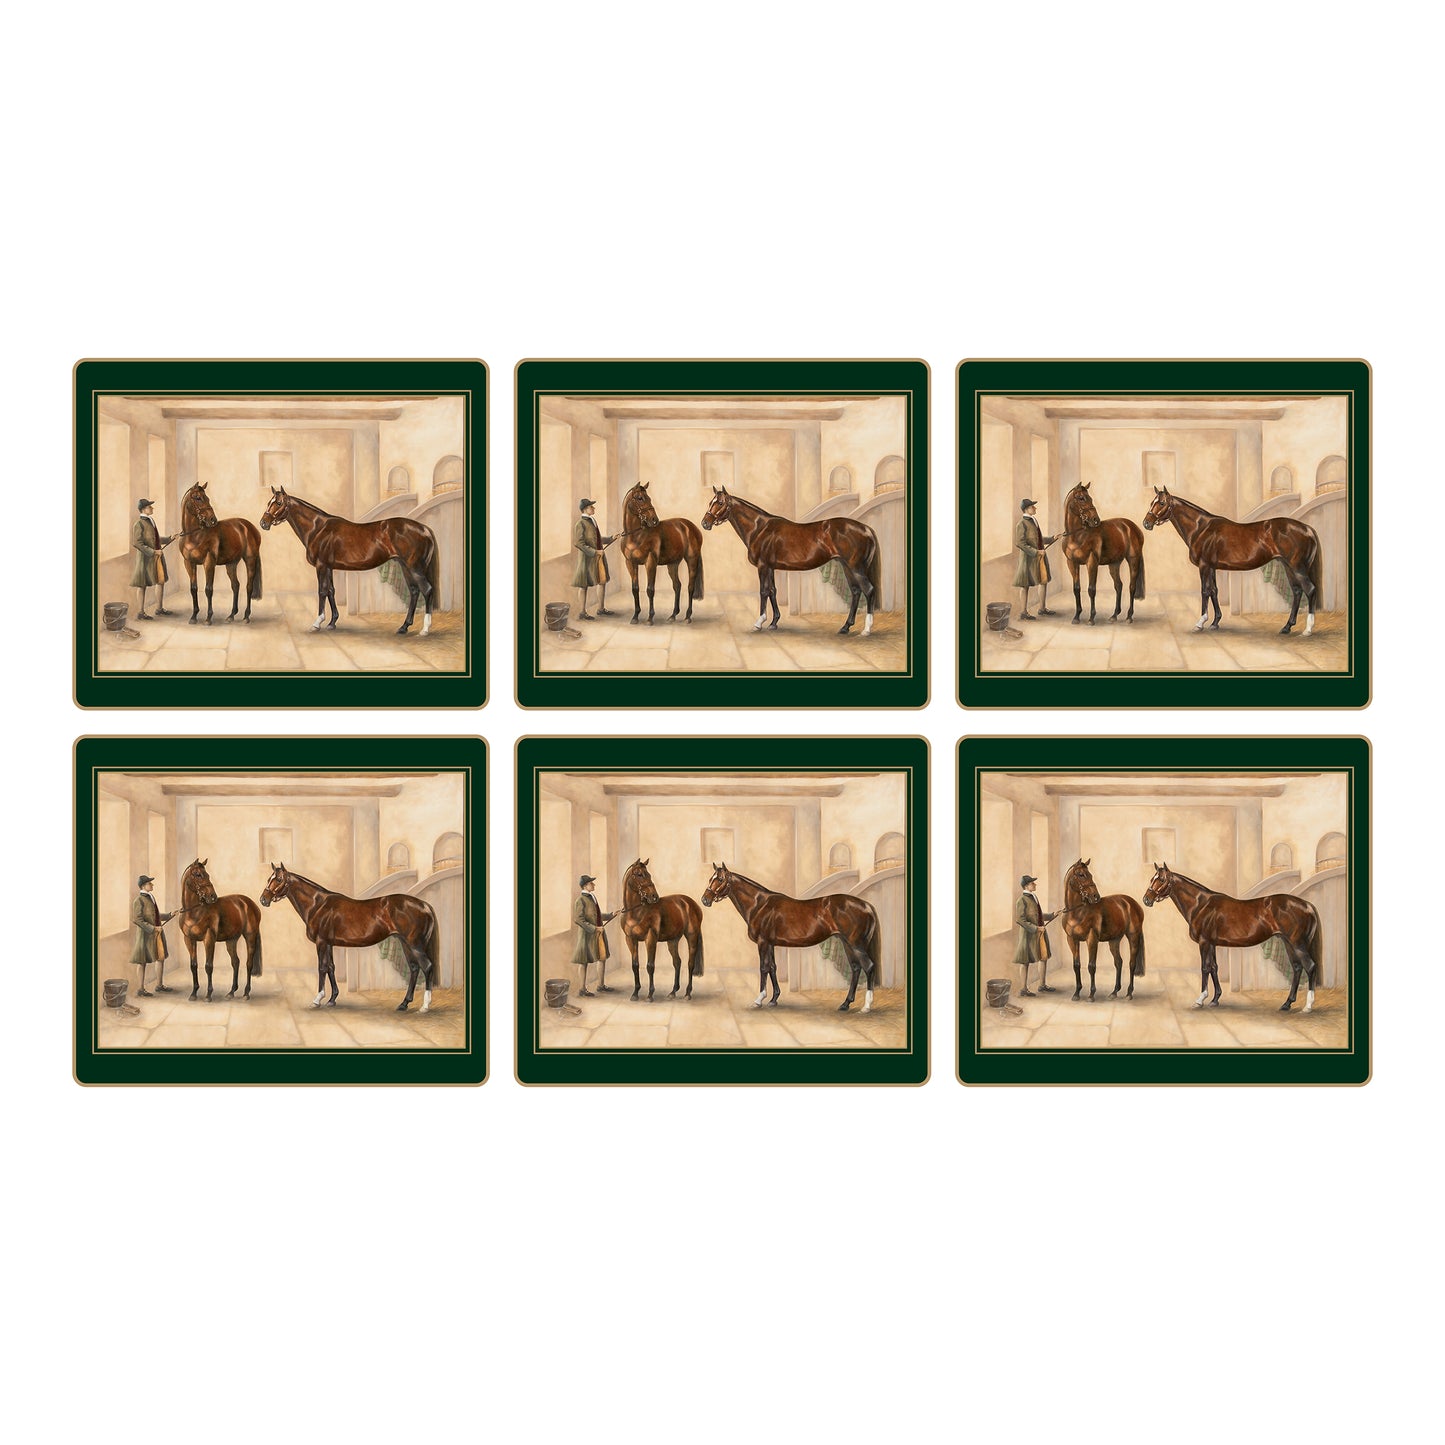 Traditional Tablemats Stable Scene